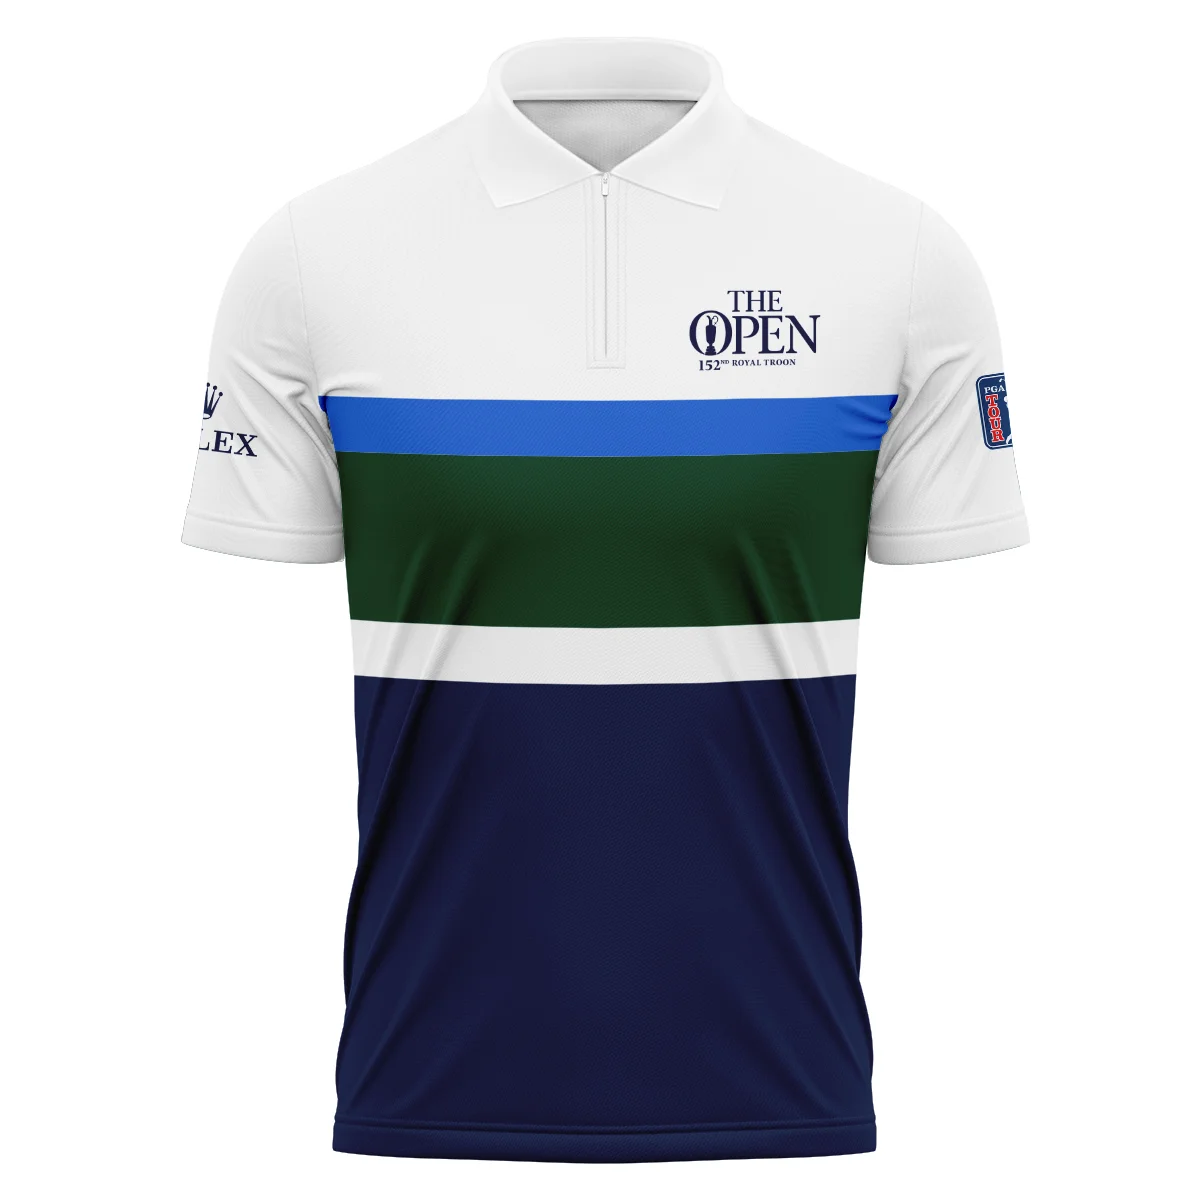 White Blue Green Background Rolex 152nd Open Championship Zipper Polo Shirt All Over Prints HOTOP270624A01ROXZPL